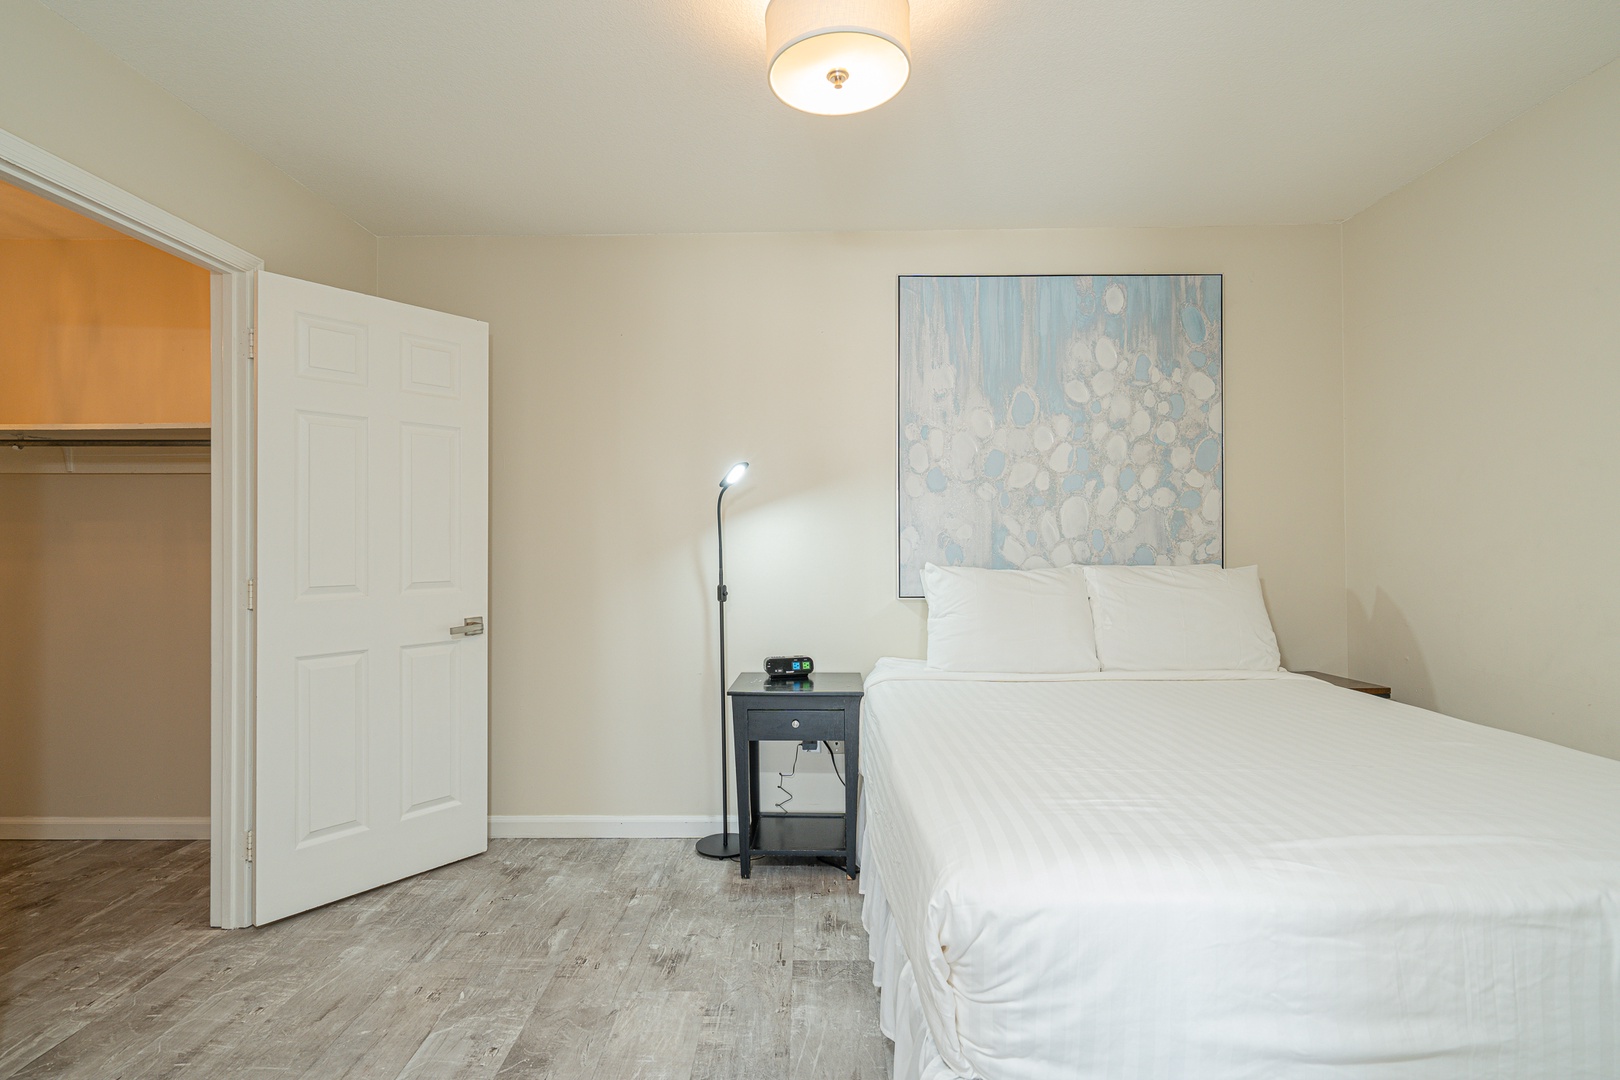 The final queen suite offers a walk-in closet, private ensuite. & Smart TV